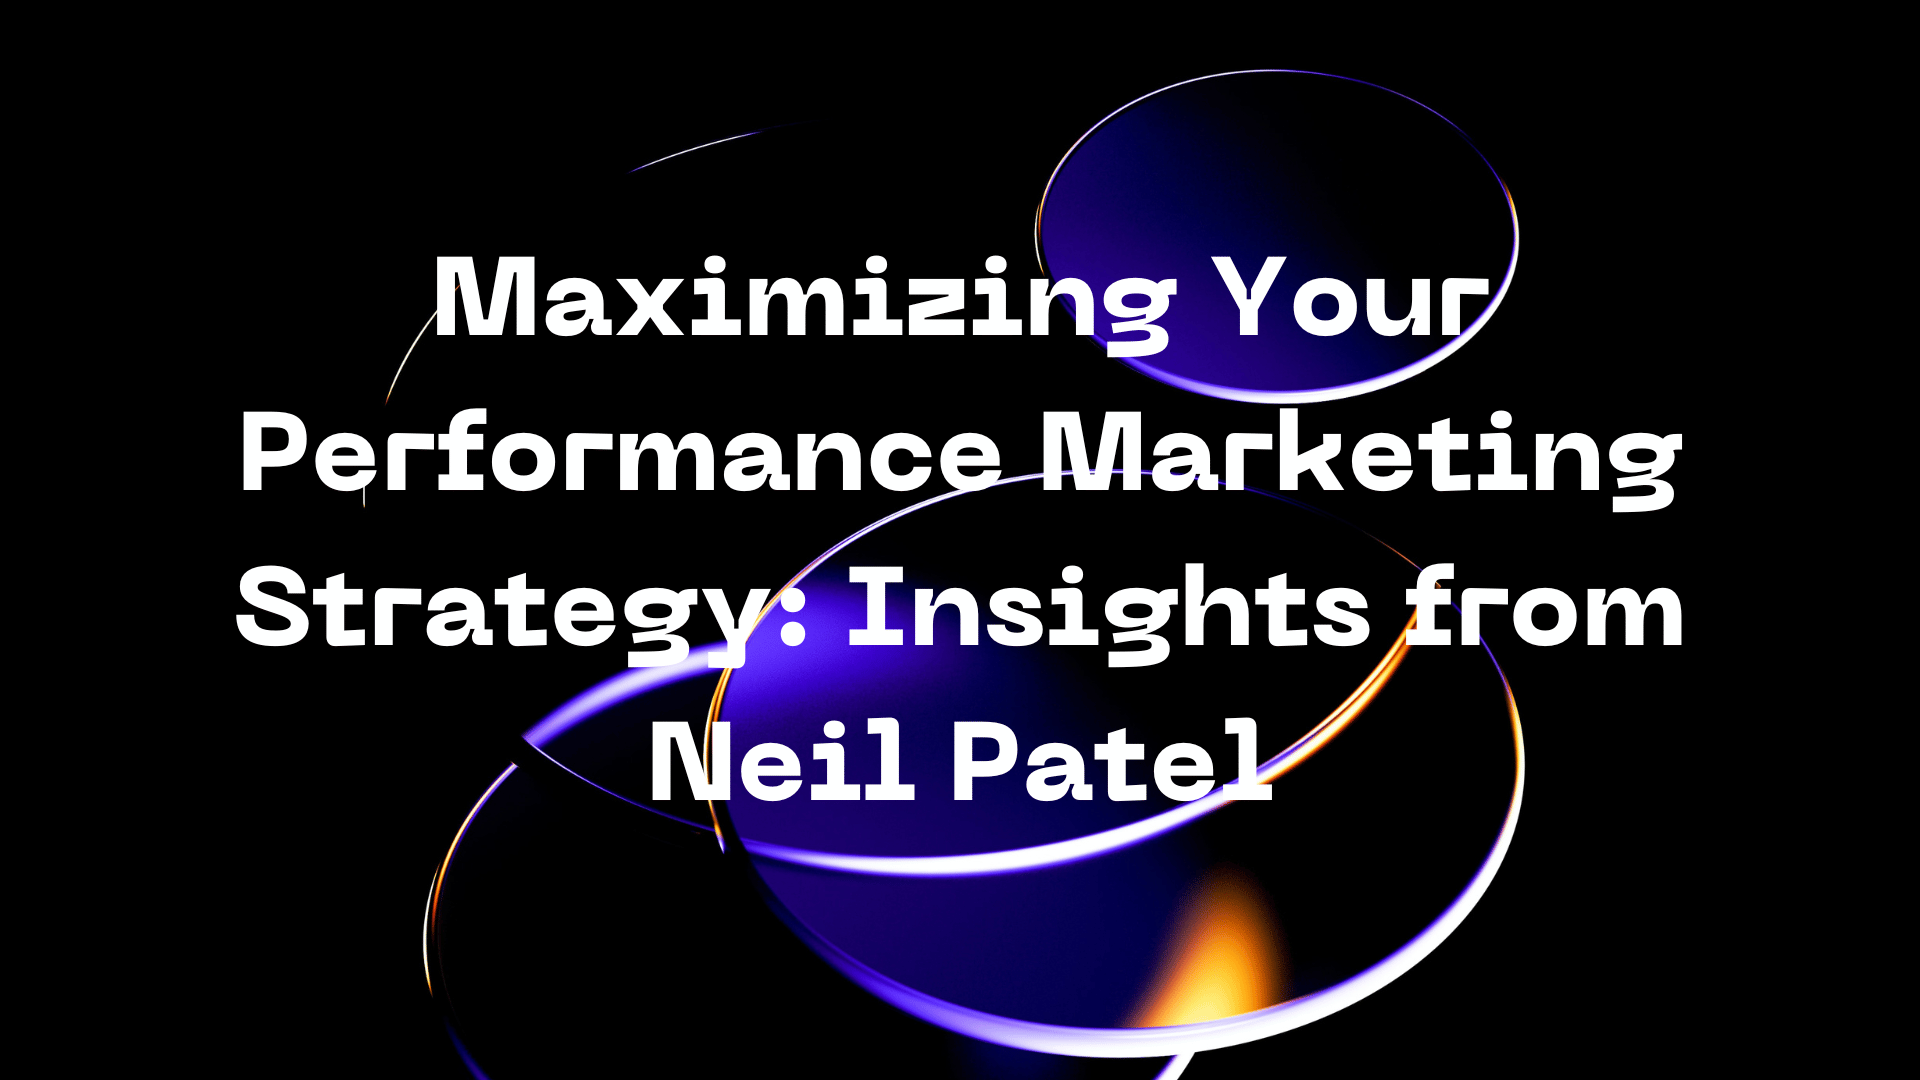 Maximizing Your Performance Marketing Strategy: Insights from Neil Patel